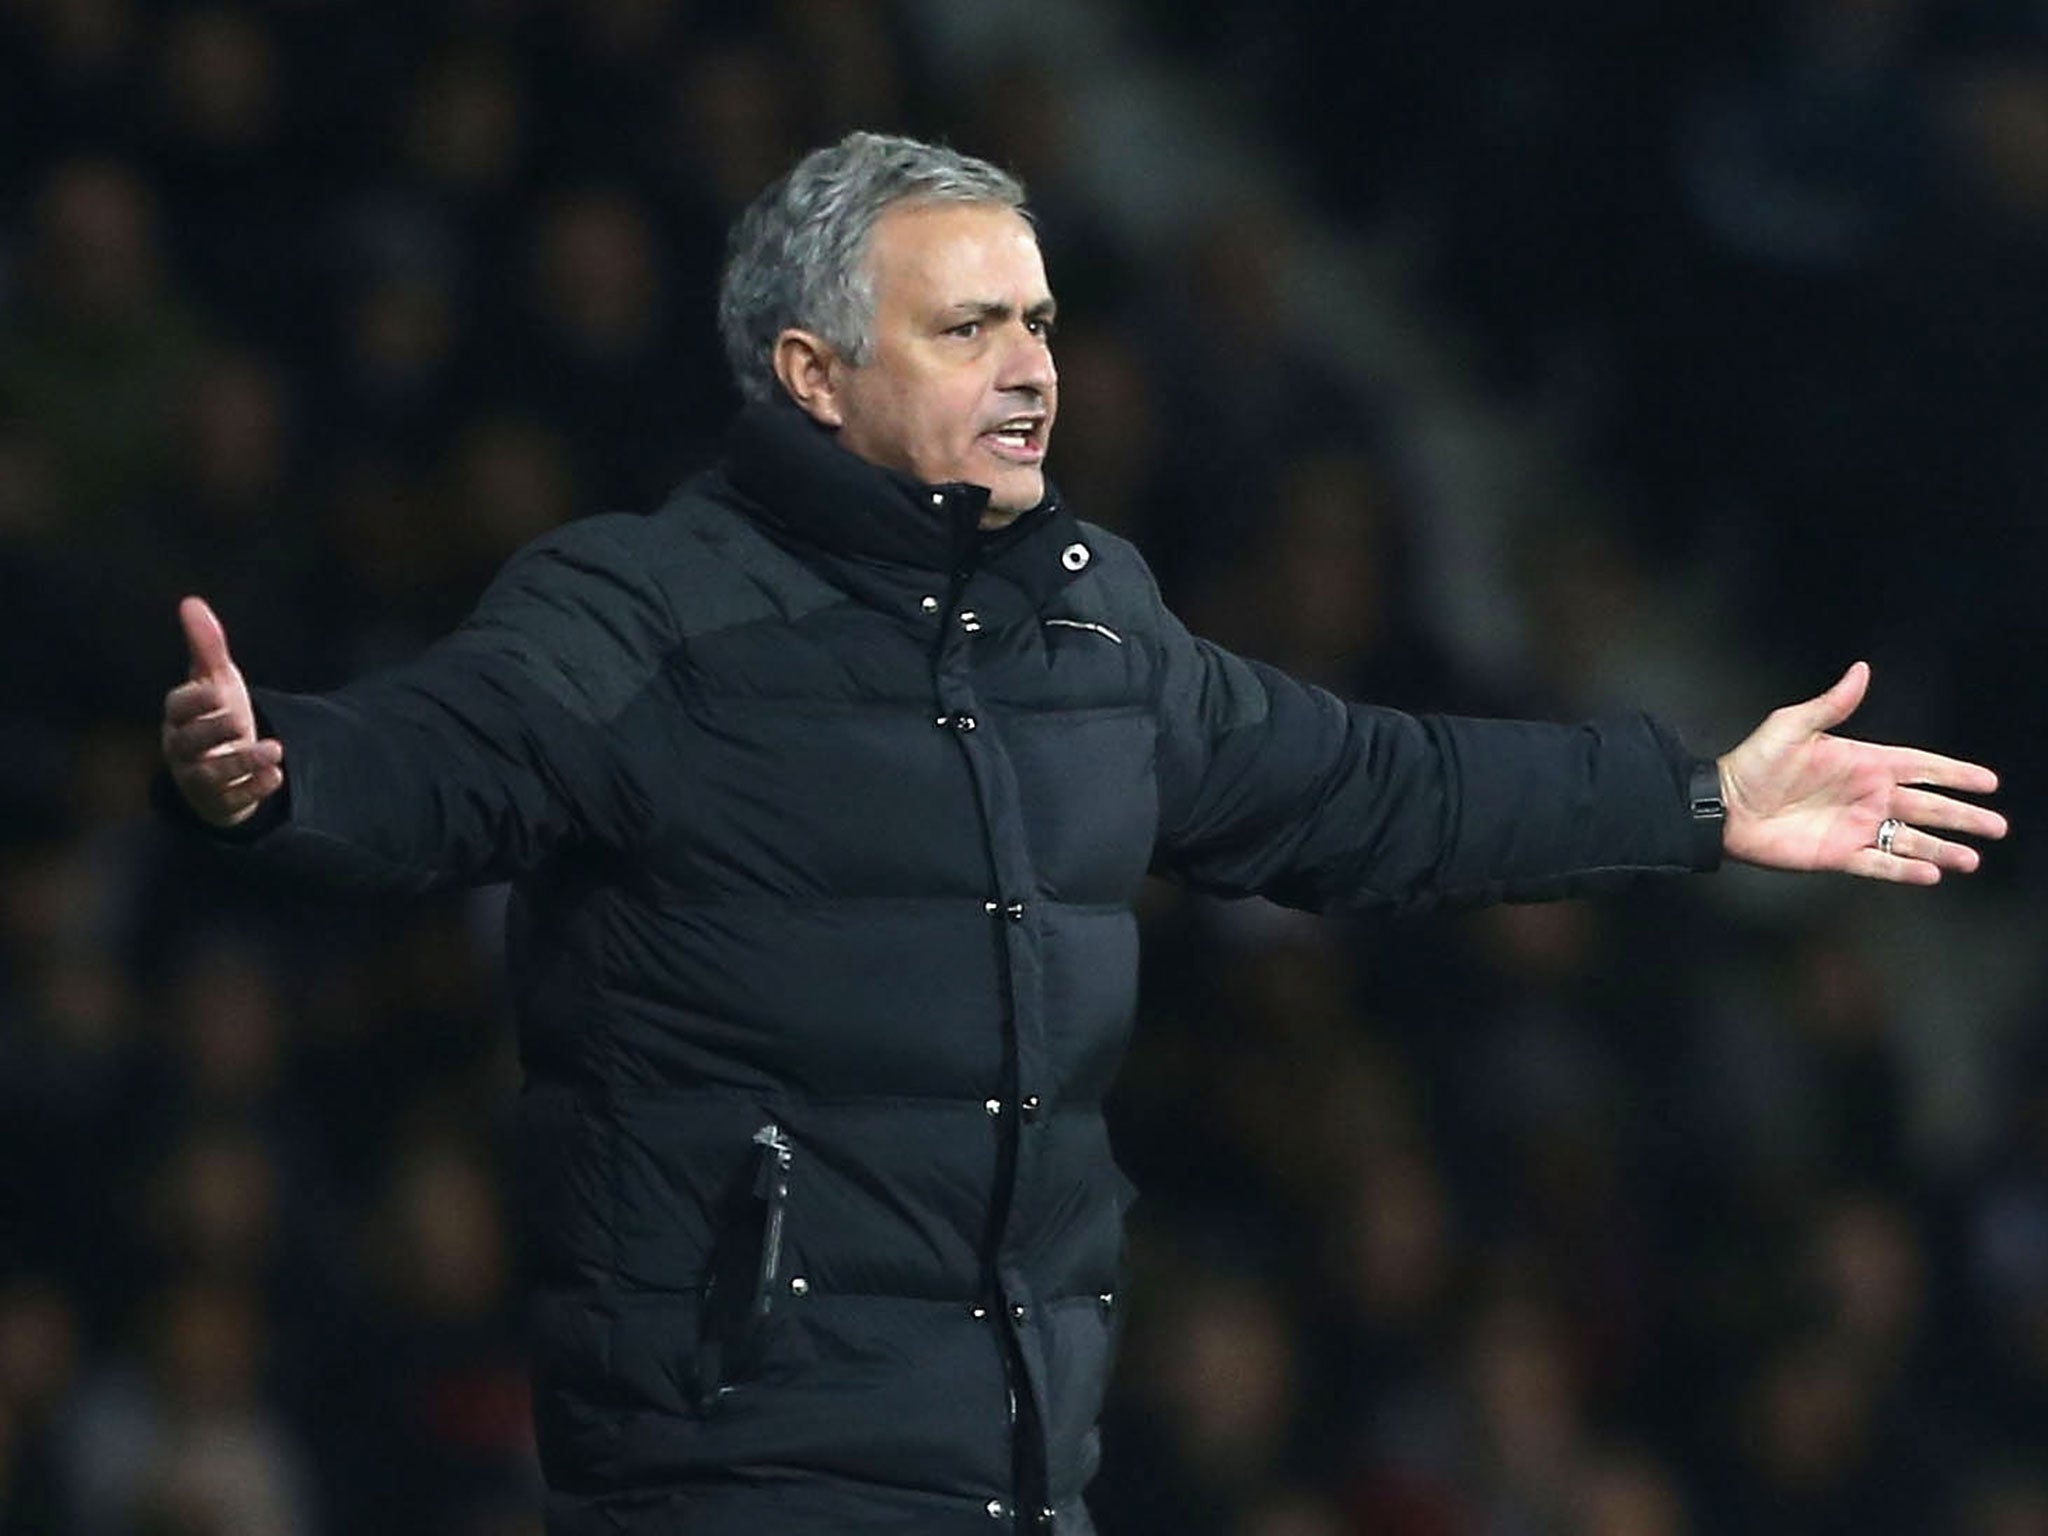 Mourinho was pleased with the way his United side performed against West Brom